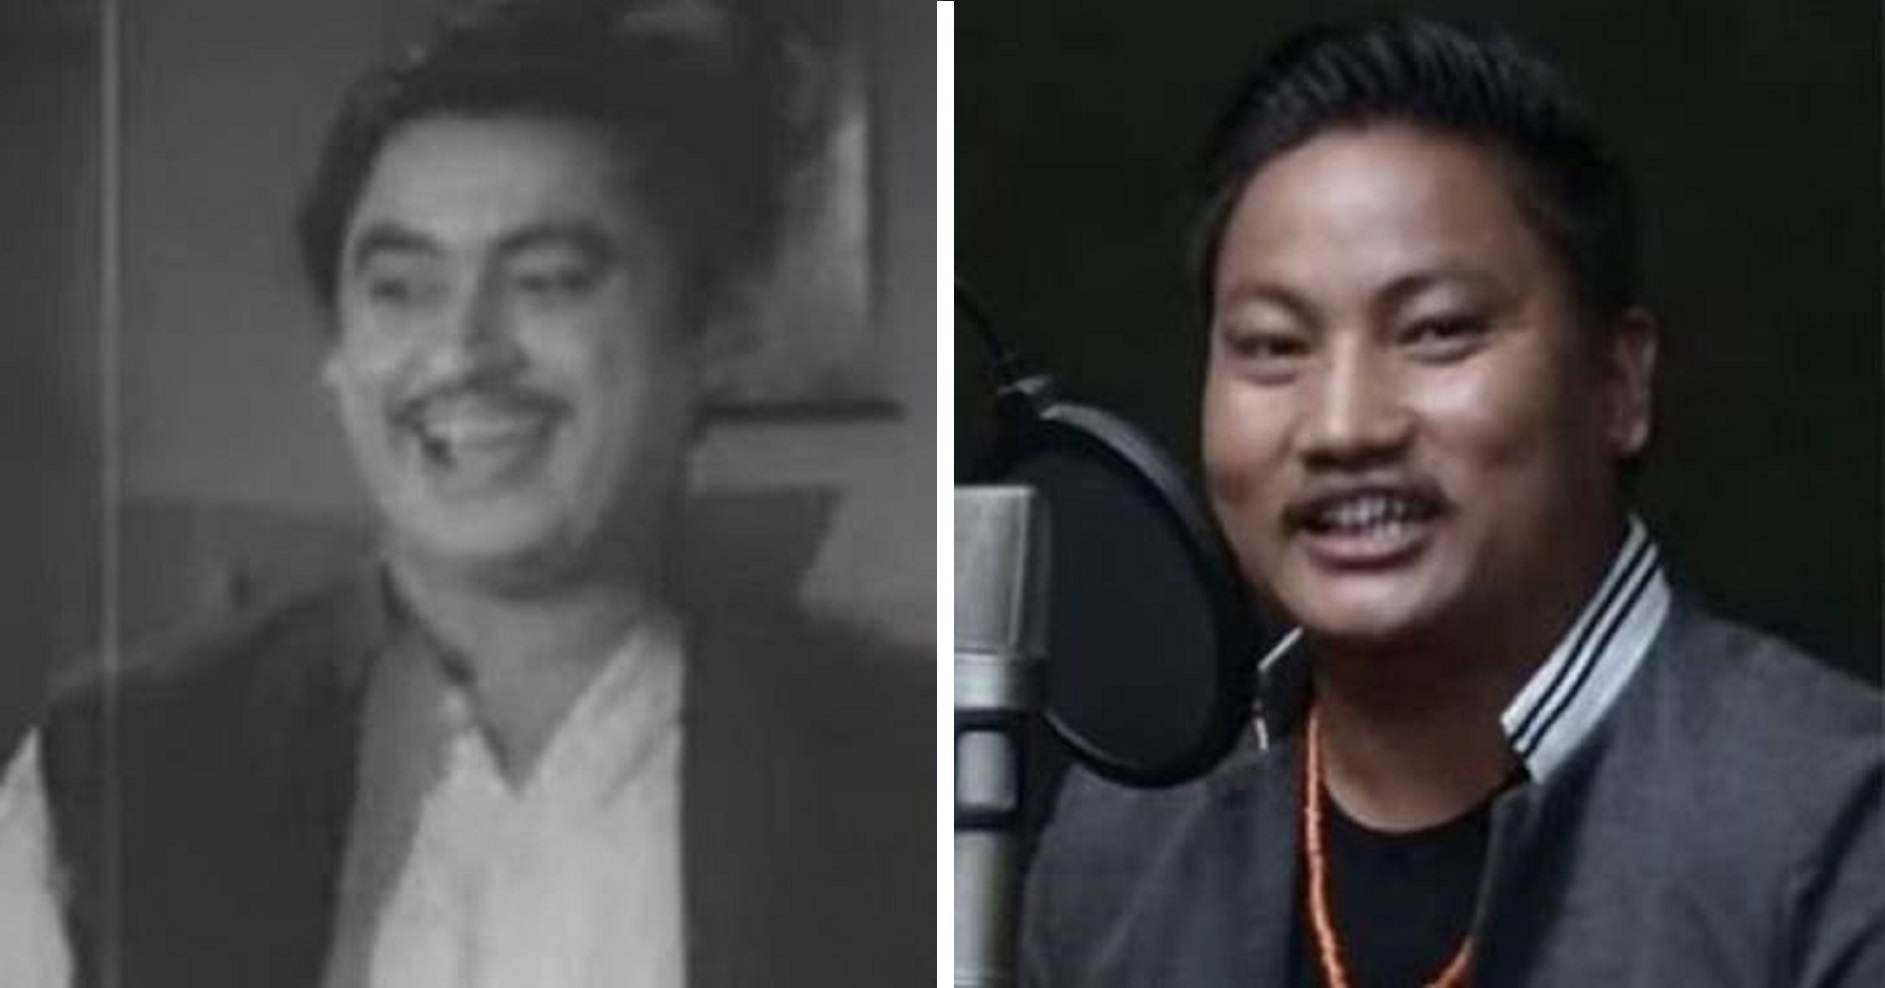 Nagaland Singer Recreates Kishore Kumar’s Classic Bengali Song In His Voice, And People Are Loving It